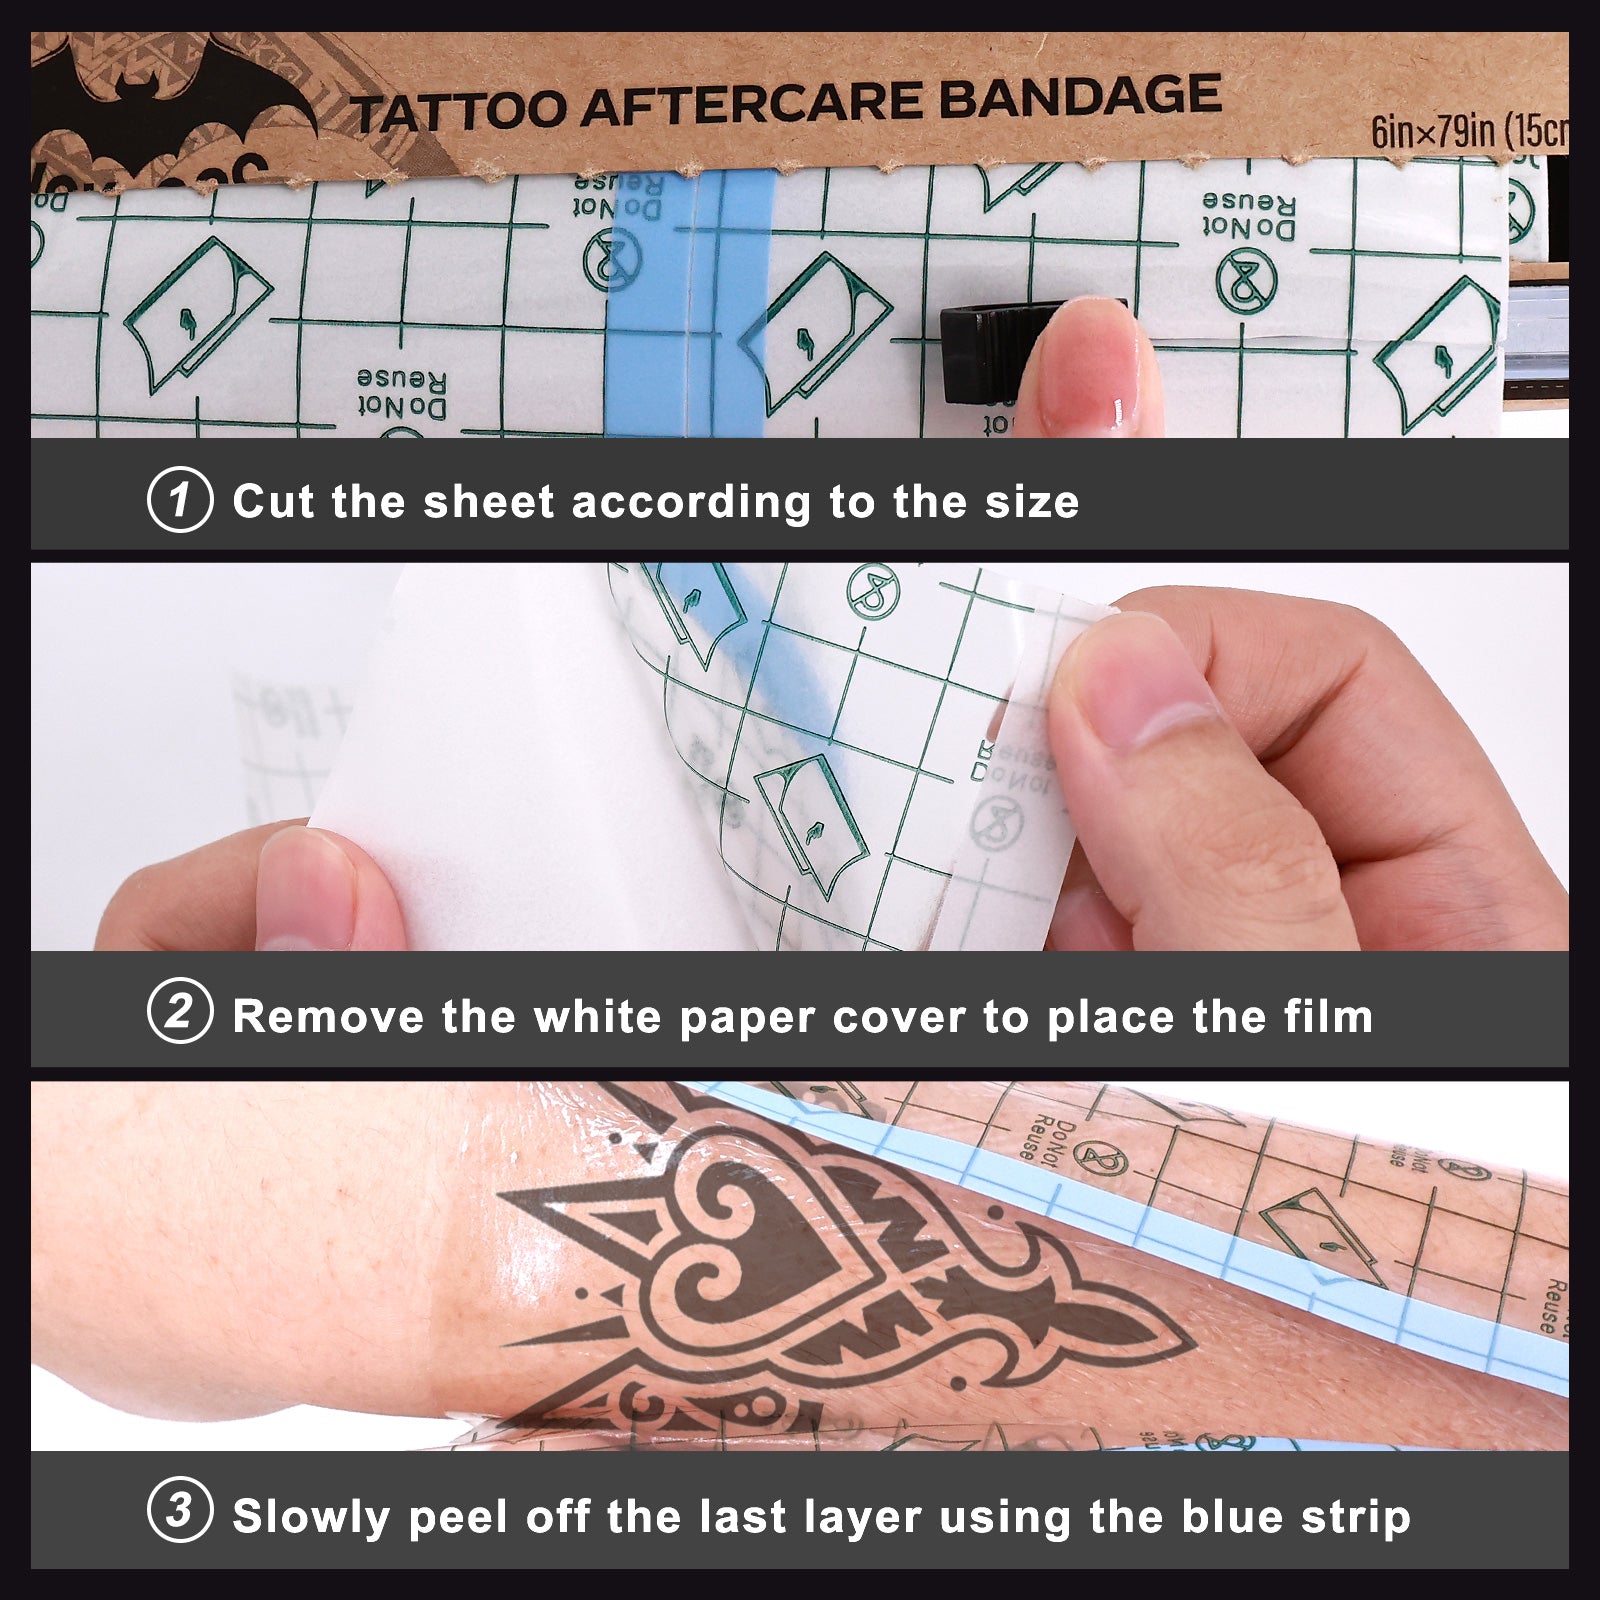 Second Skin,6 in Tattoo Aftercare,Second Skin Tattoo Bandage,Tattoo Cover  Up Tape,Tattoo Bandage Wrap,Protective Clear Adhesive Bandages for Tattoo